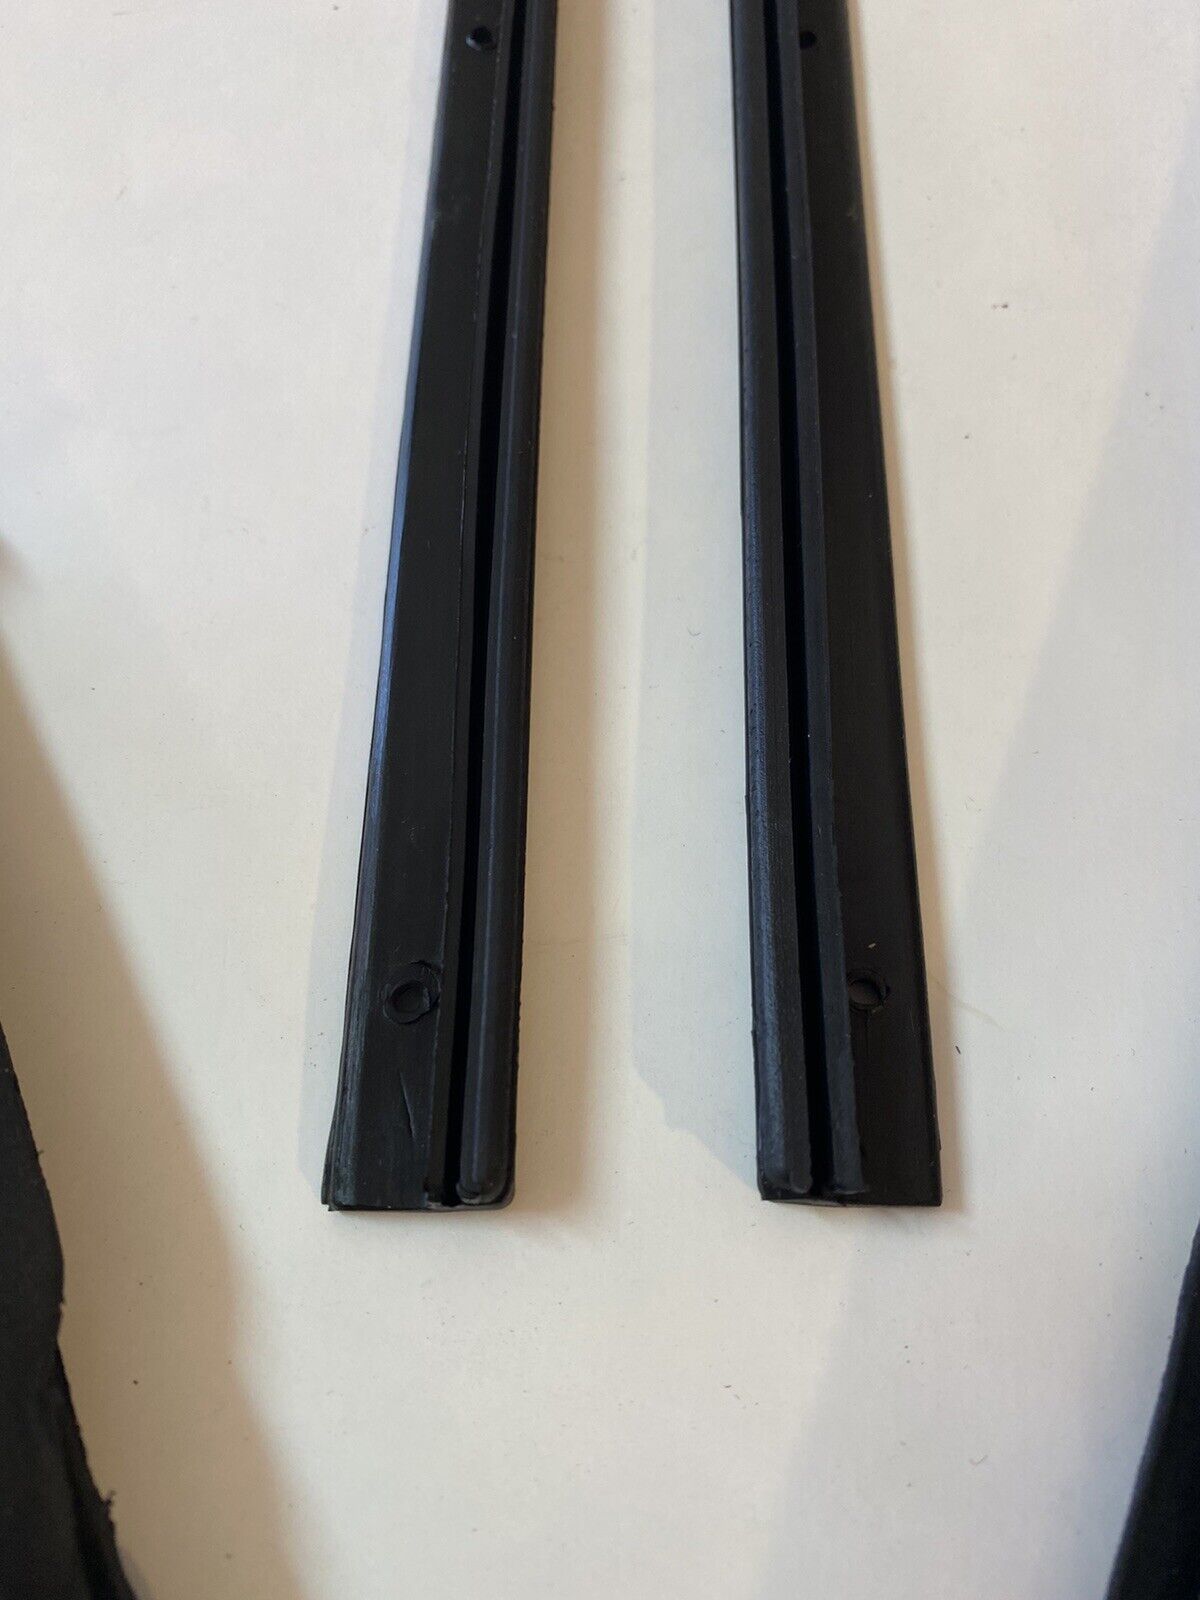 1967-1972 Chevy GMC Pickup Truck Vent Window Seal Rubber PAIR 4 Seals USA